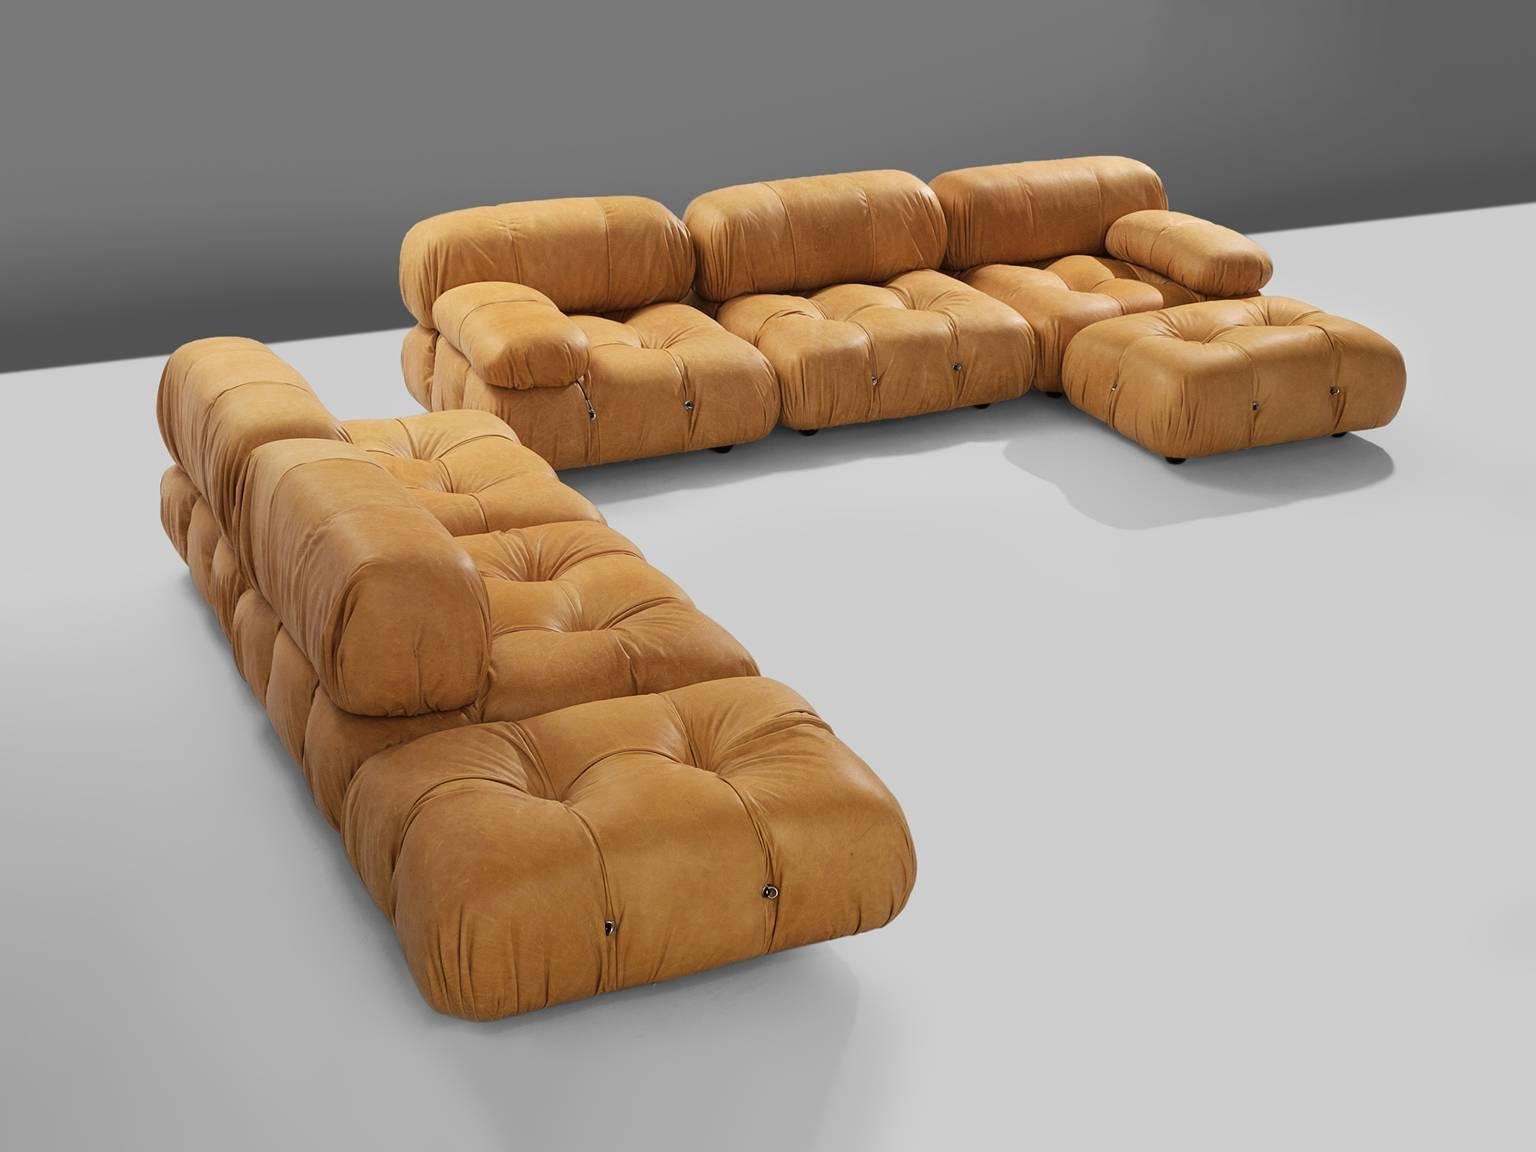 Mario Bellini, large modular 'Cameleonda' sofa, cognac leather upholstery, Italy, 1971, reupholstered by our in-house upholstery atelier. 

The sectional elements this sofa was made with, can be used freely and apart from one another. The backs and